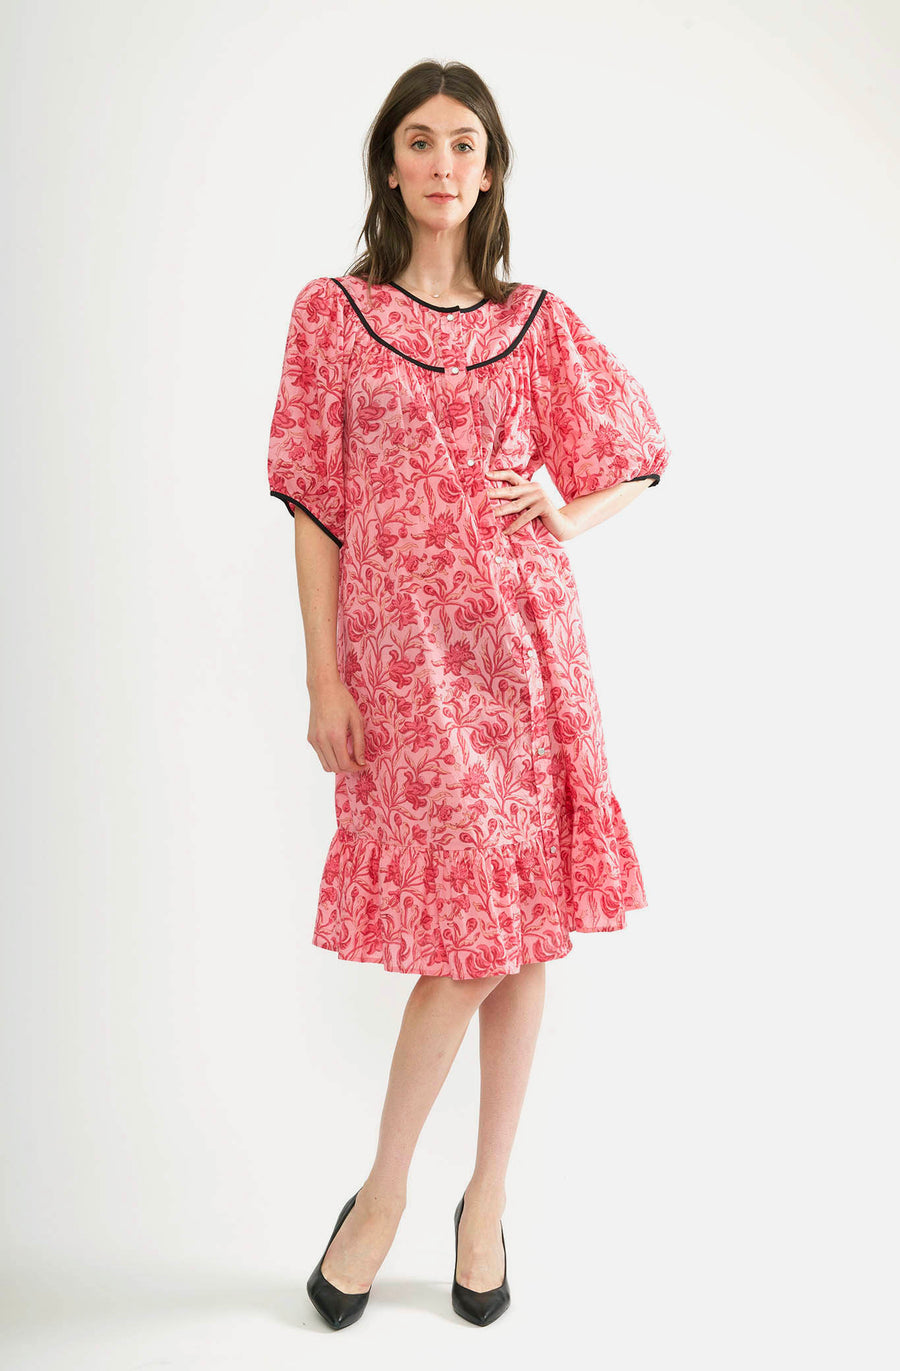 Snap Housedress in Pink Floral Block Print